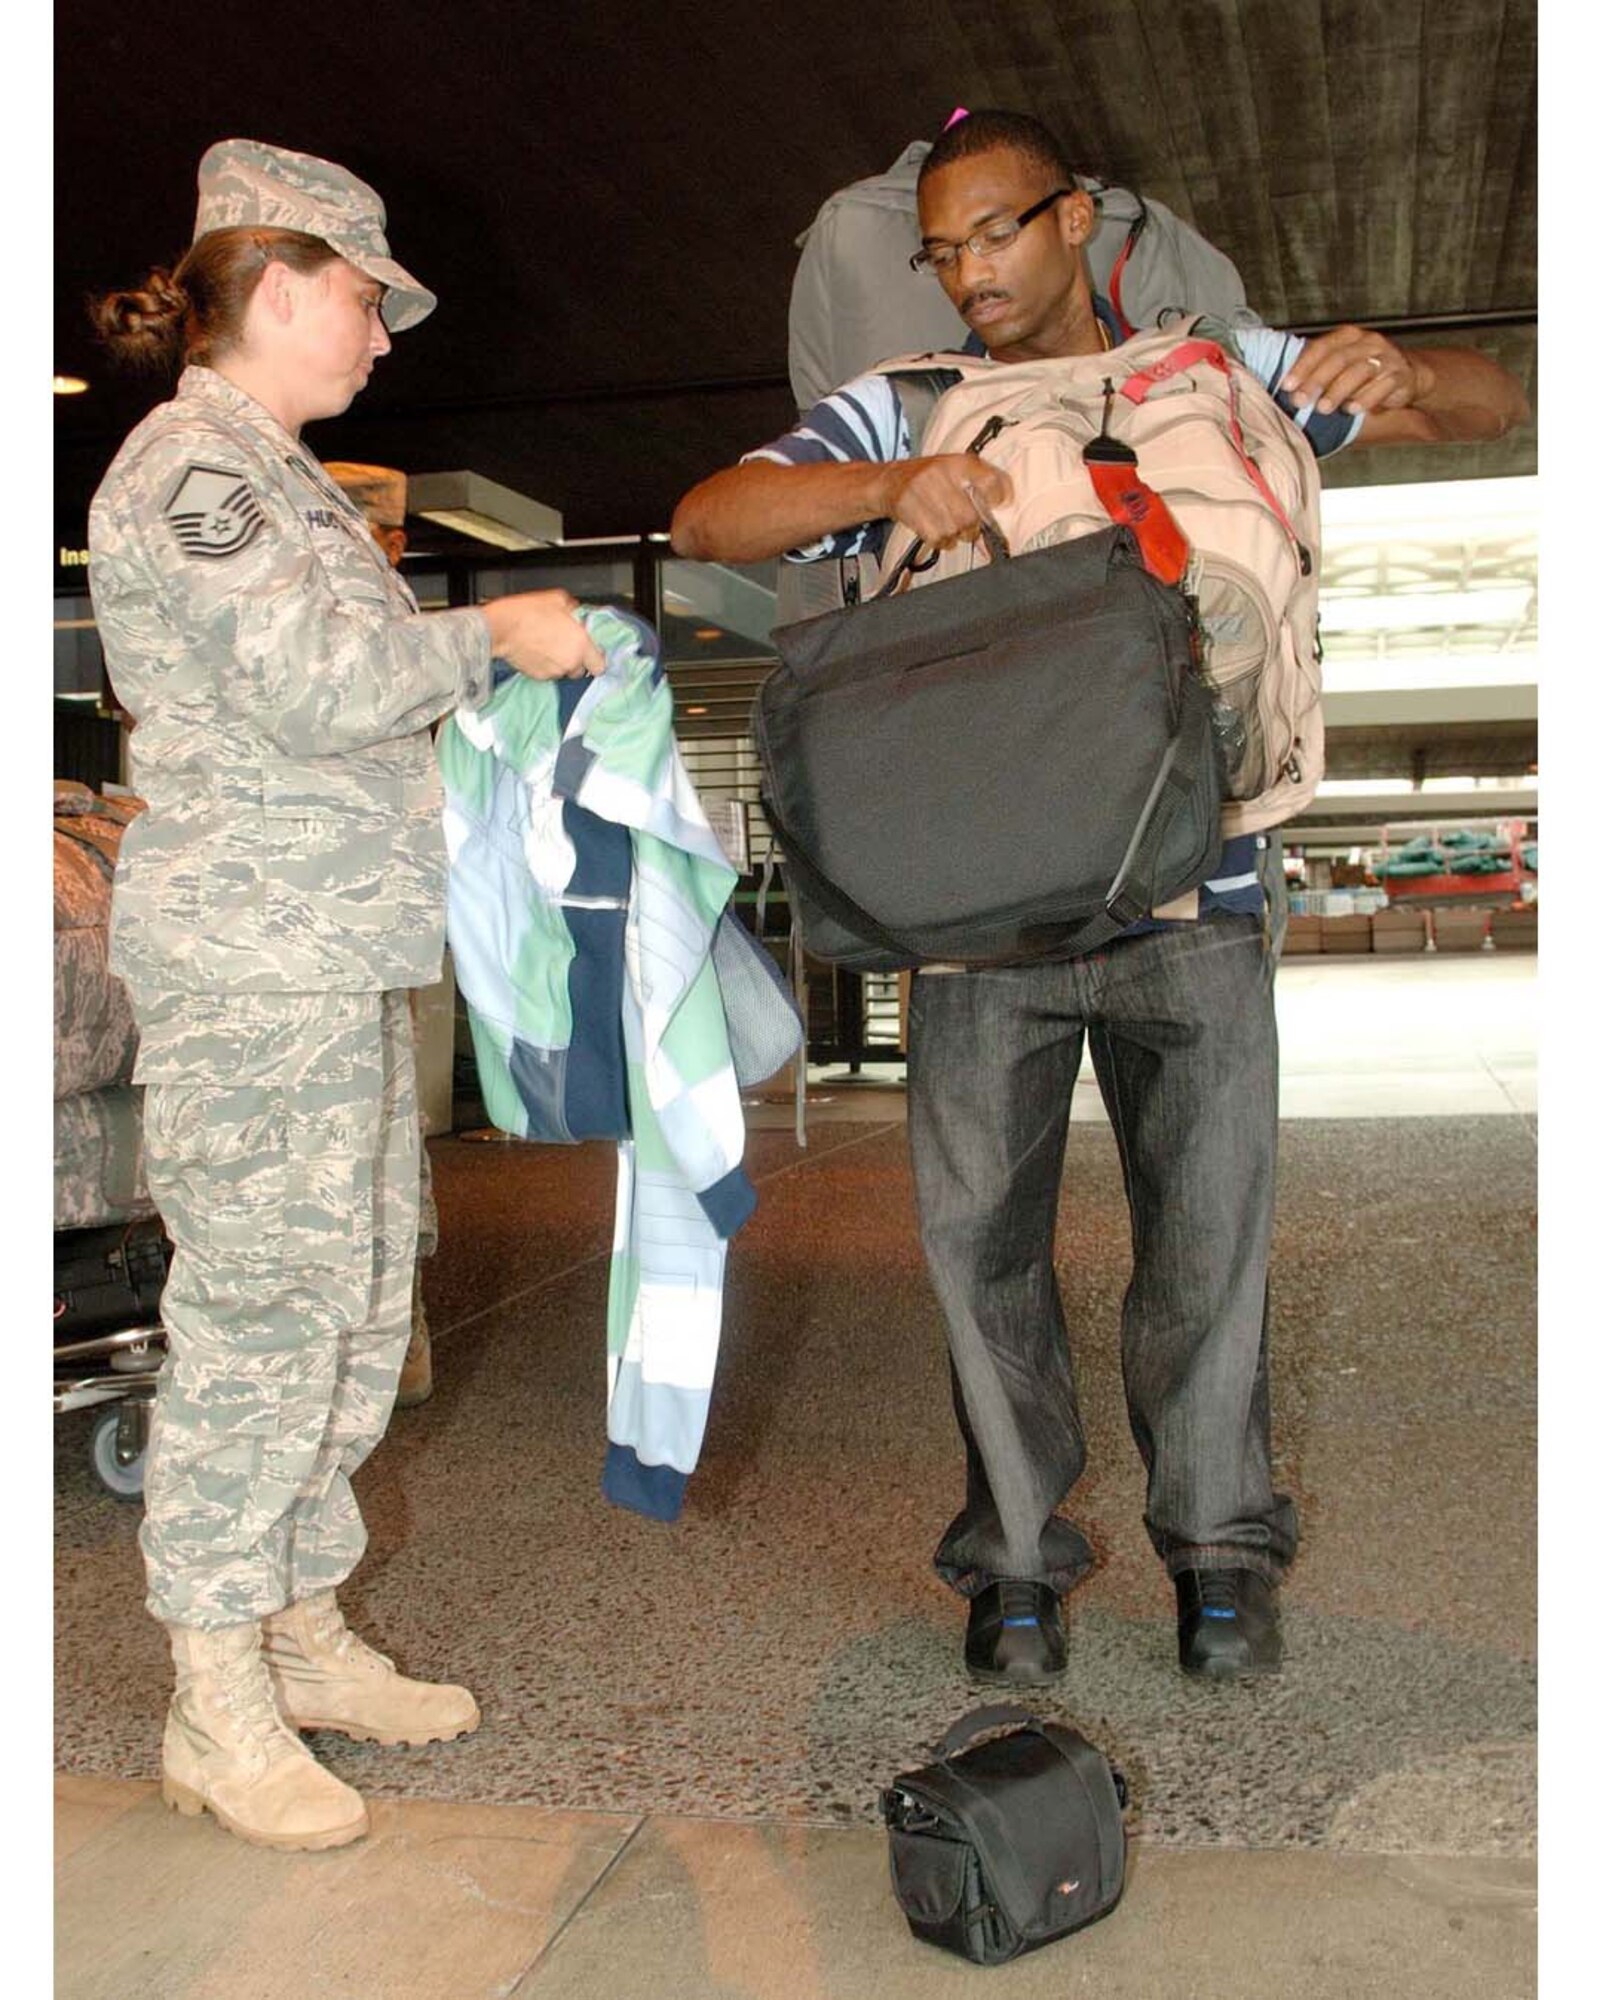 Master Sgt. Janet Hudson, 624th Regional Support Group Family Support, helps Tech. Sgt. Dedric Brown, 624th Civil Engineer Squadron, with his gear before he leaves the Honolulu (Hawaii) International Airport July 31, 2009. Fifty-four Air Force reservists from the squadron at Hickam Air Force Base were mobilized for six months of duty at Bagram Airfield, Afghanistan. (U.S. Air Force photo/Mark Bates)

